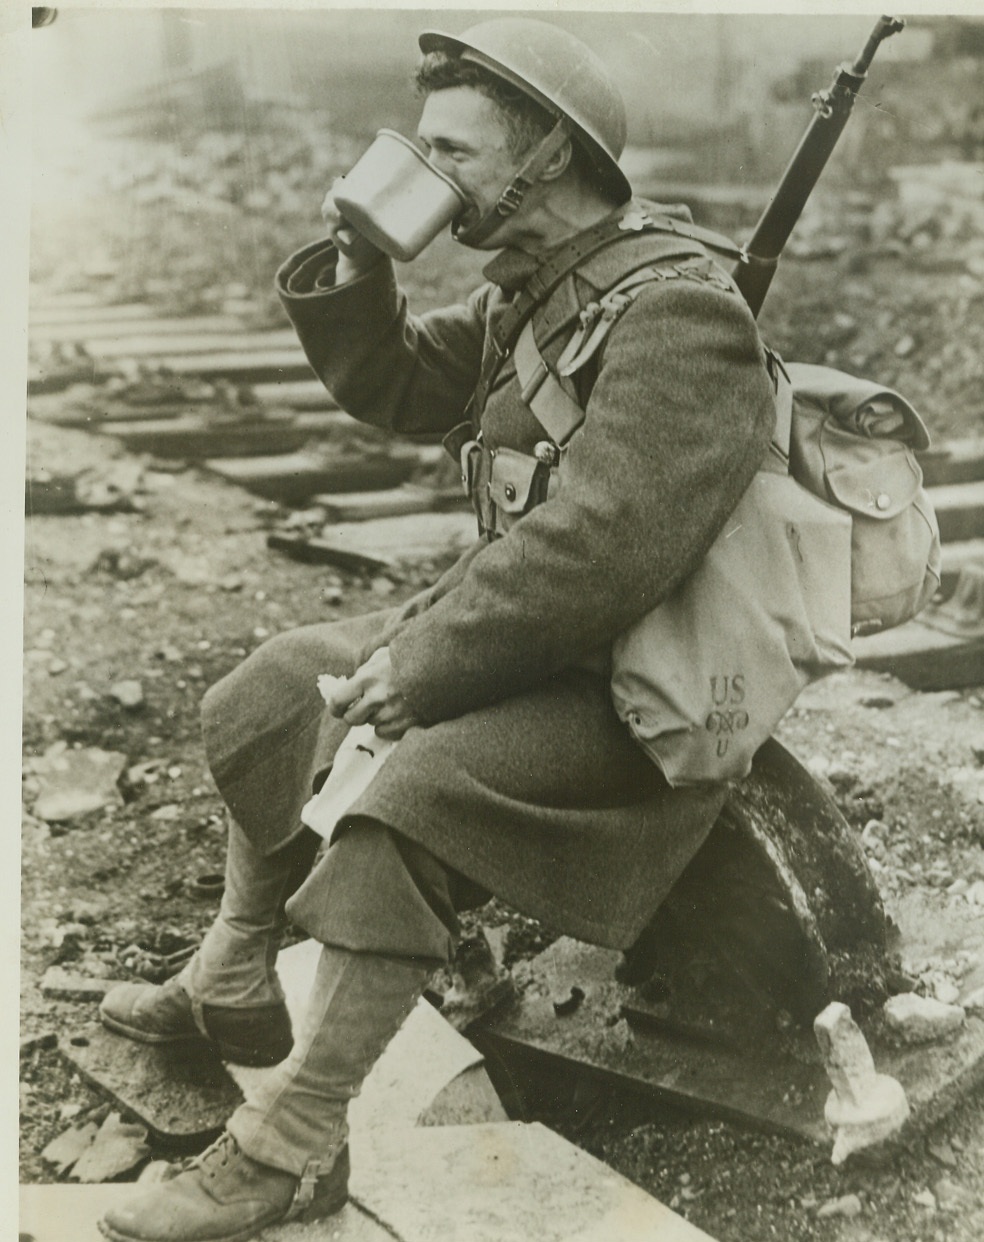 American Soldier Enjoys Mug of Tea in Ireland, 2/8/1942. A NORTHERN IRISH PORT -- An American soldier, member of the American Expeditionary Force, as he enjoyed a mug of tea on a dockside, in "A Northern Irish Port."  Credit: (ACME);